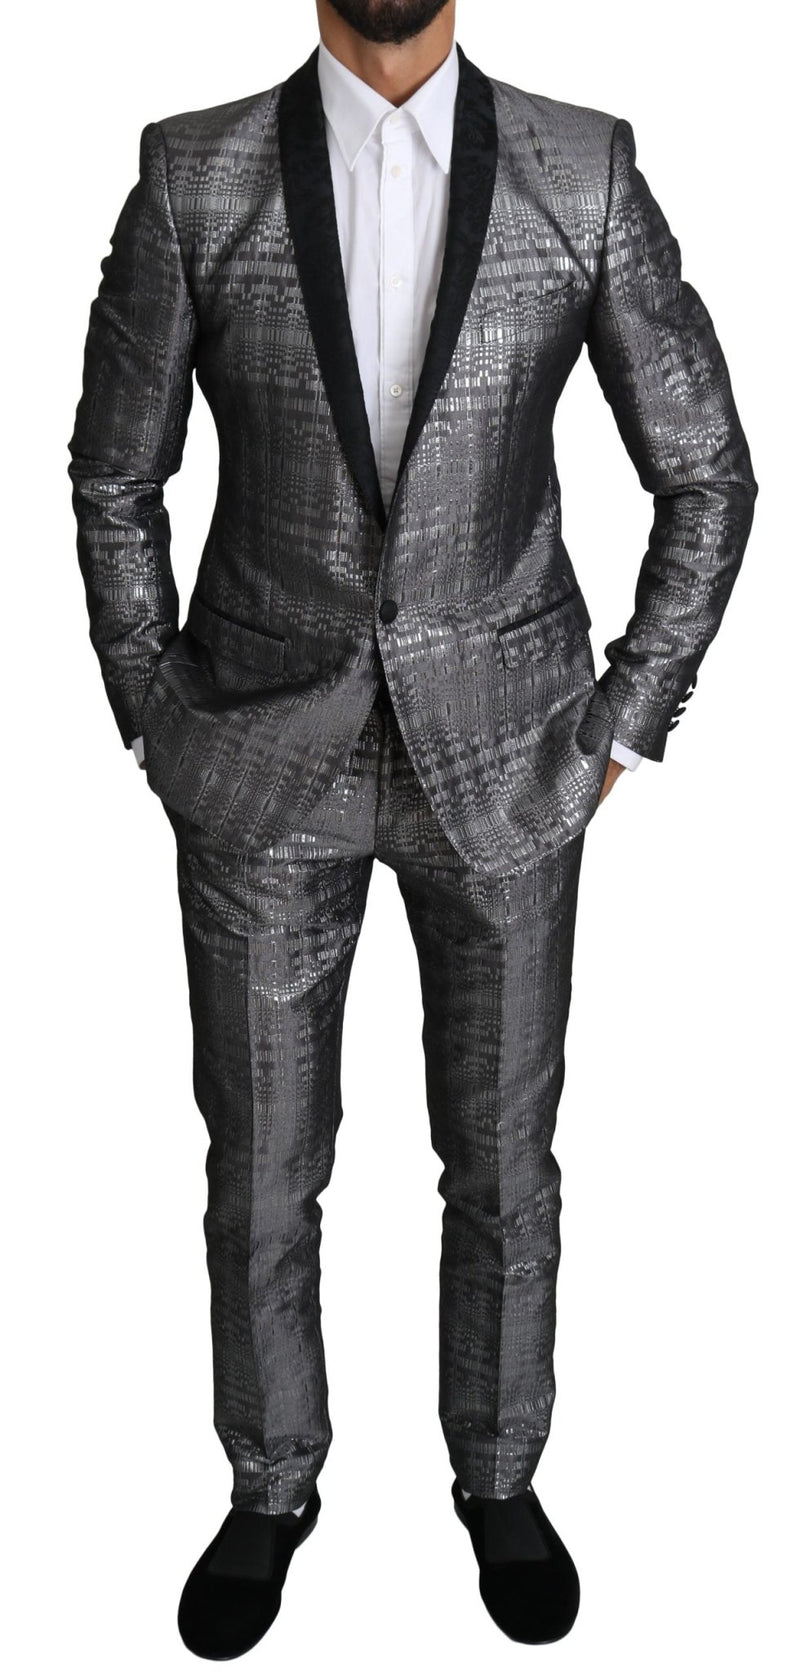 GOLD Silver Single Breasted 2 Piece Suit - Avaz Shop